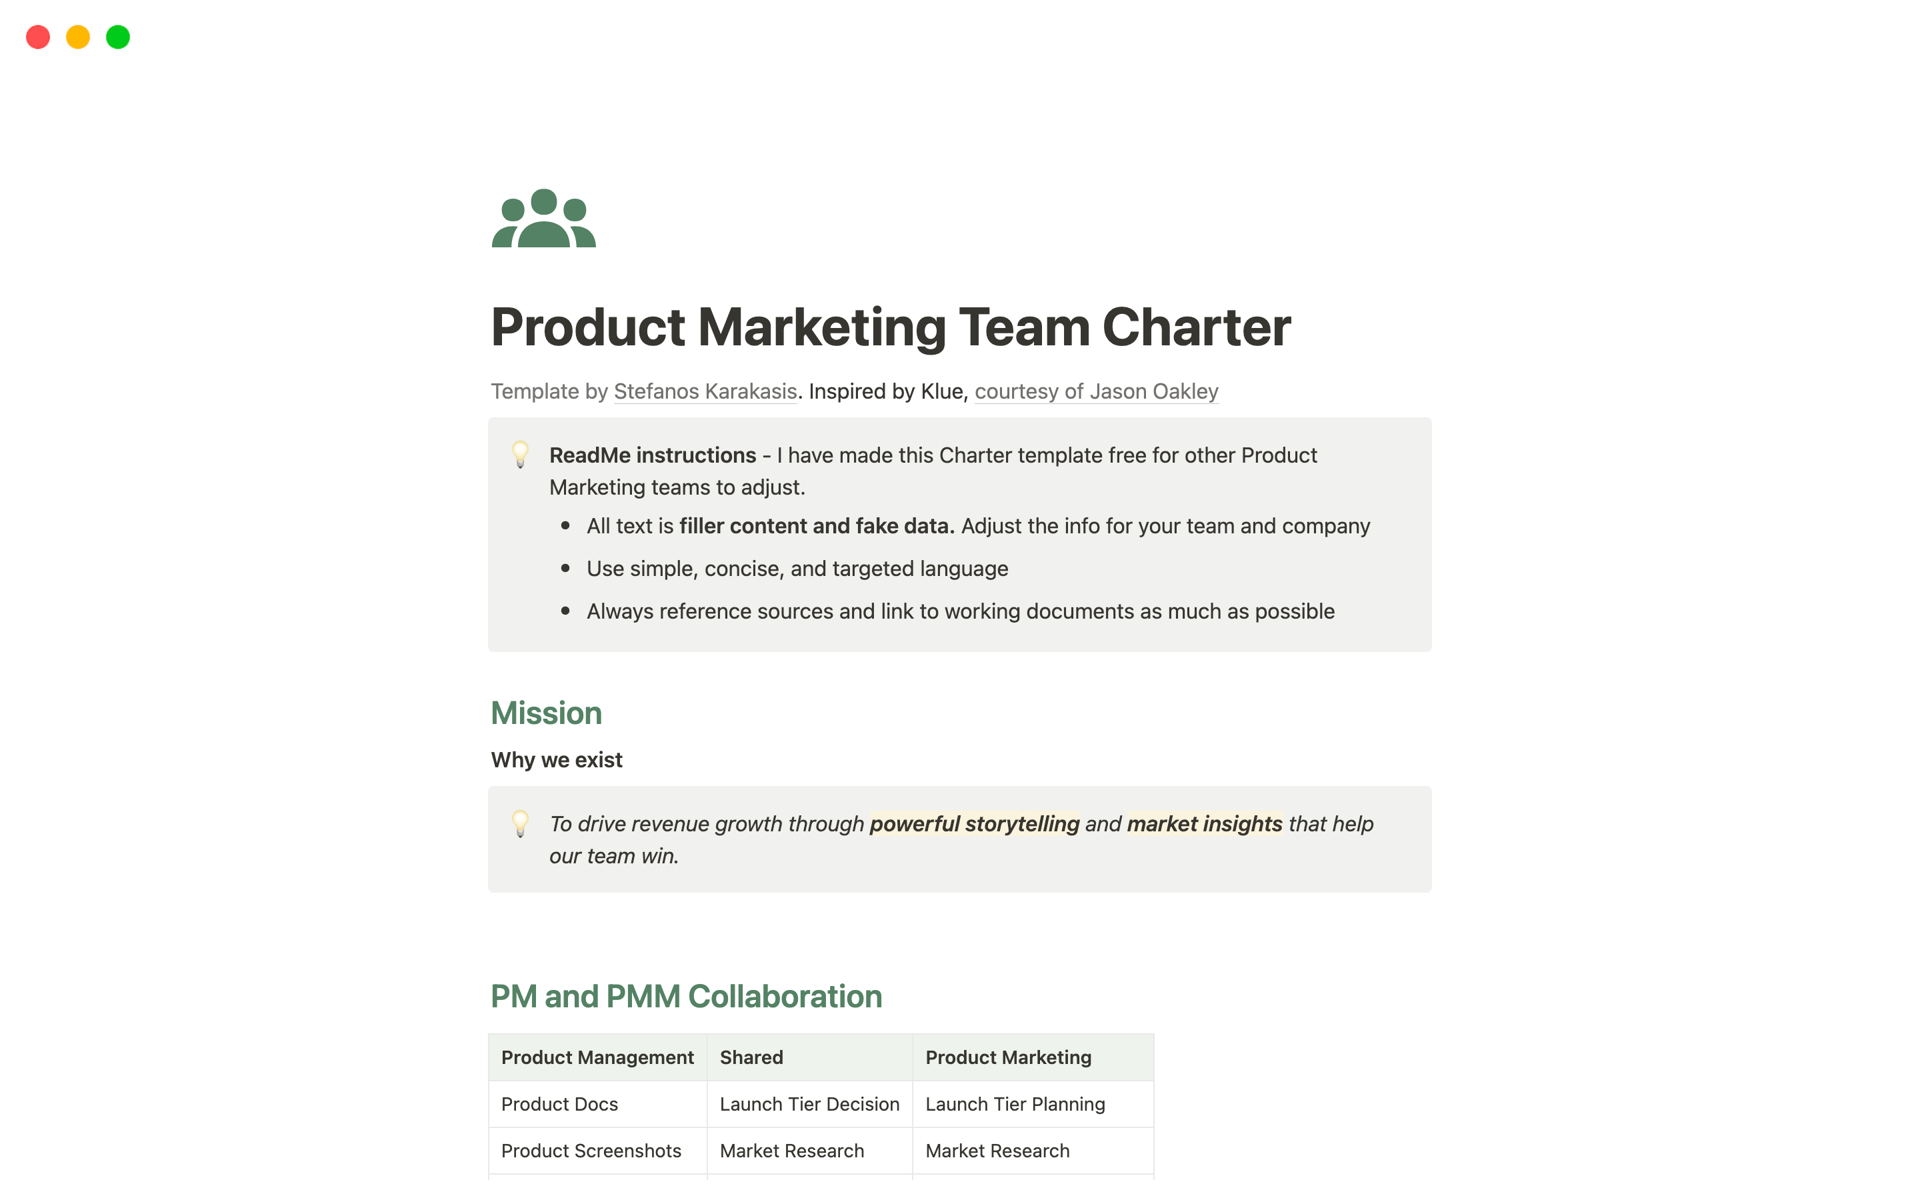 Give key stakeholders an explanation on ‘what product marketing’ does within your company.